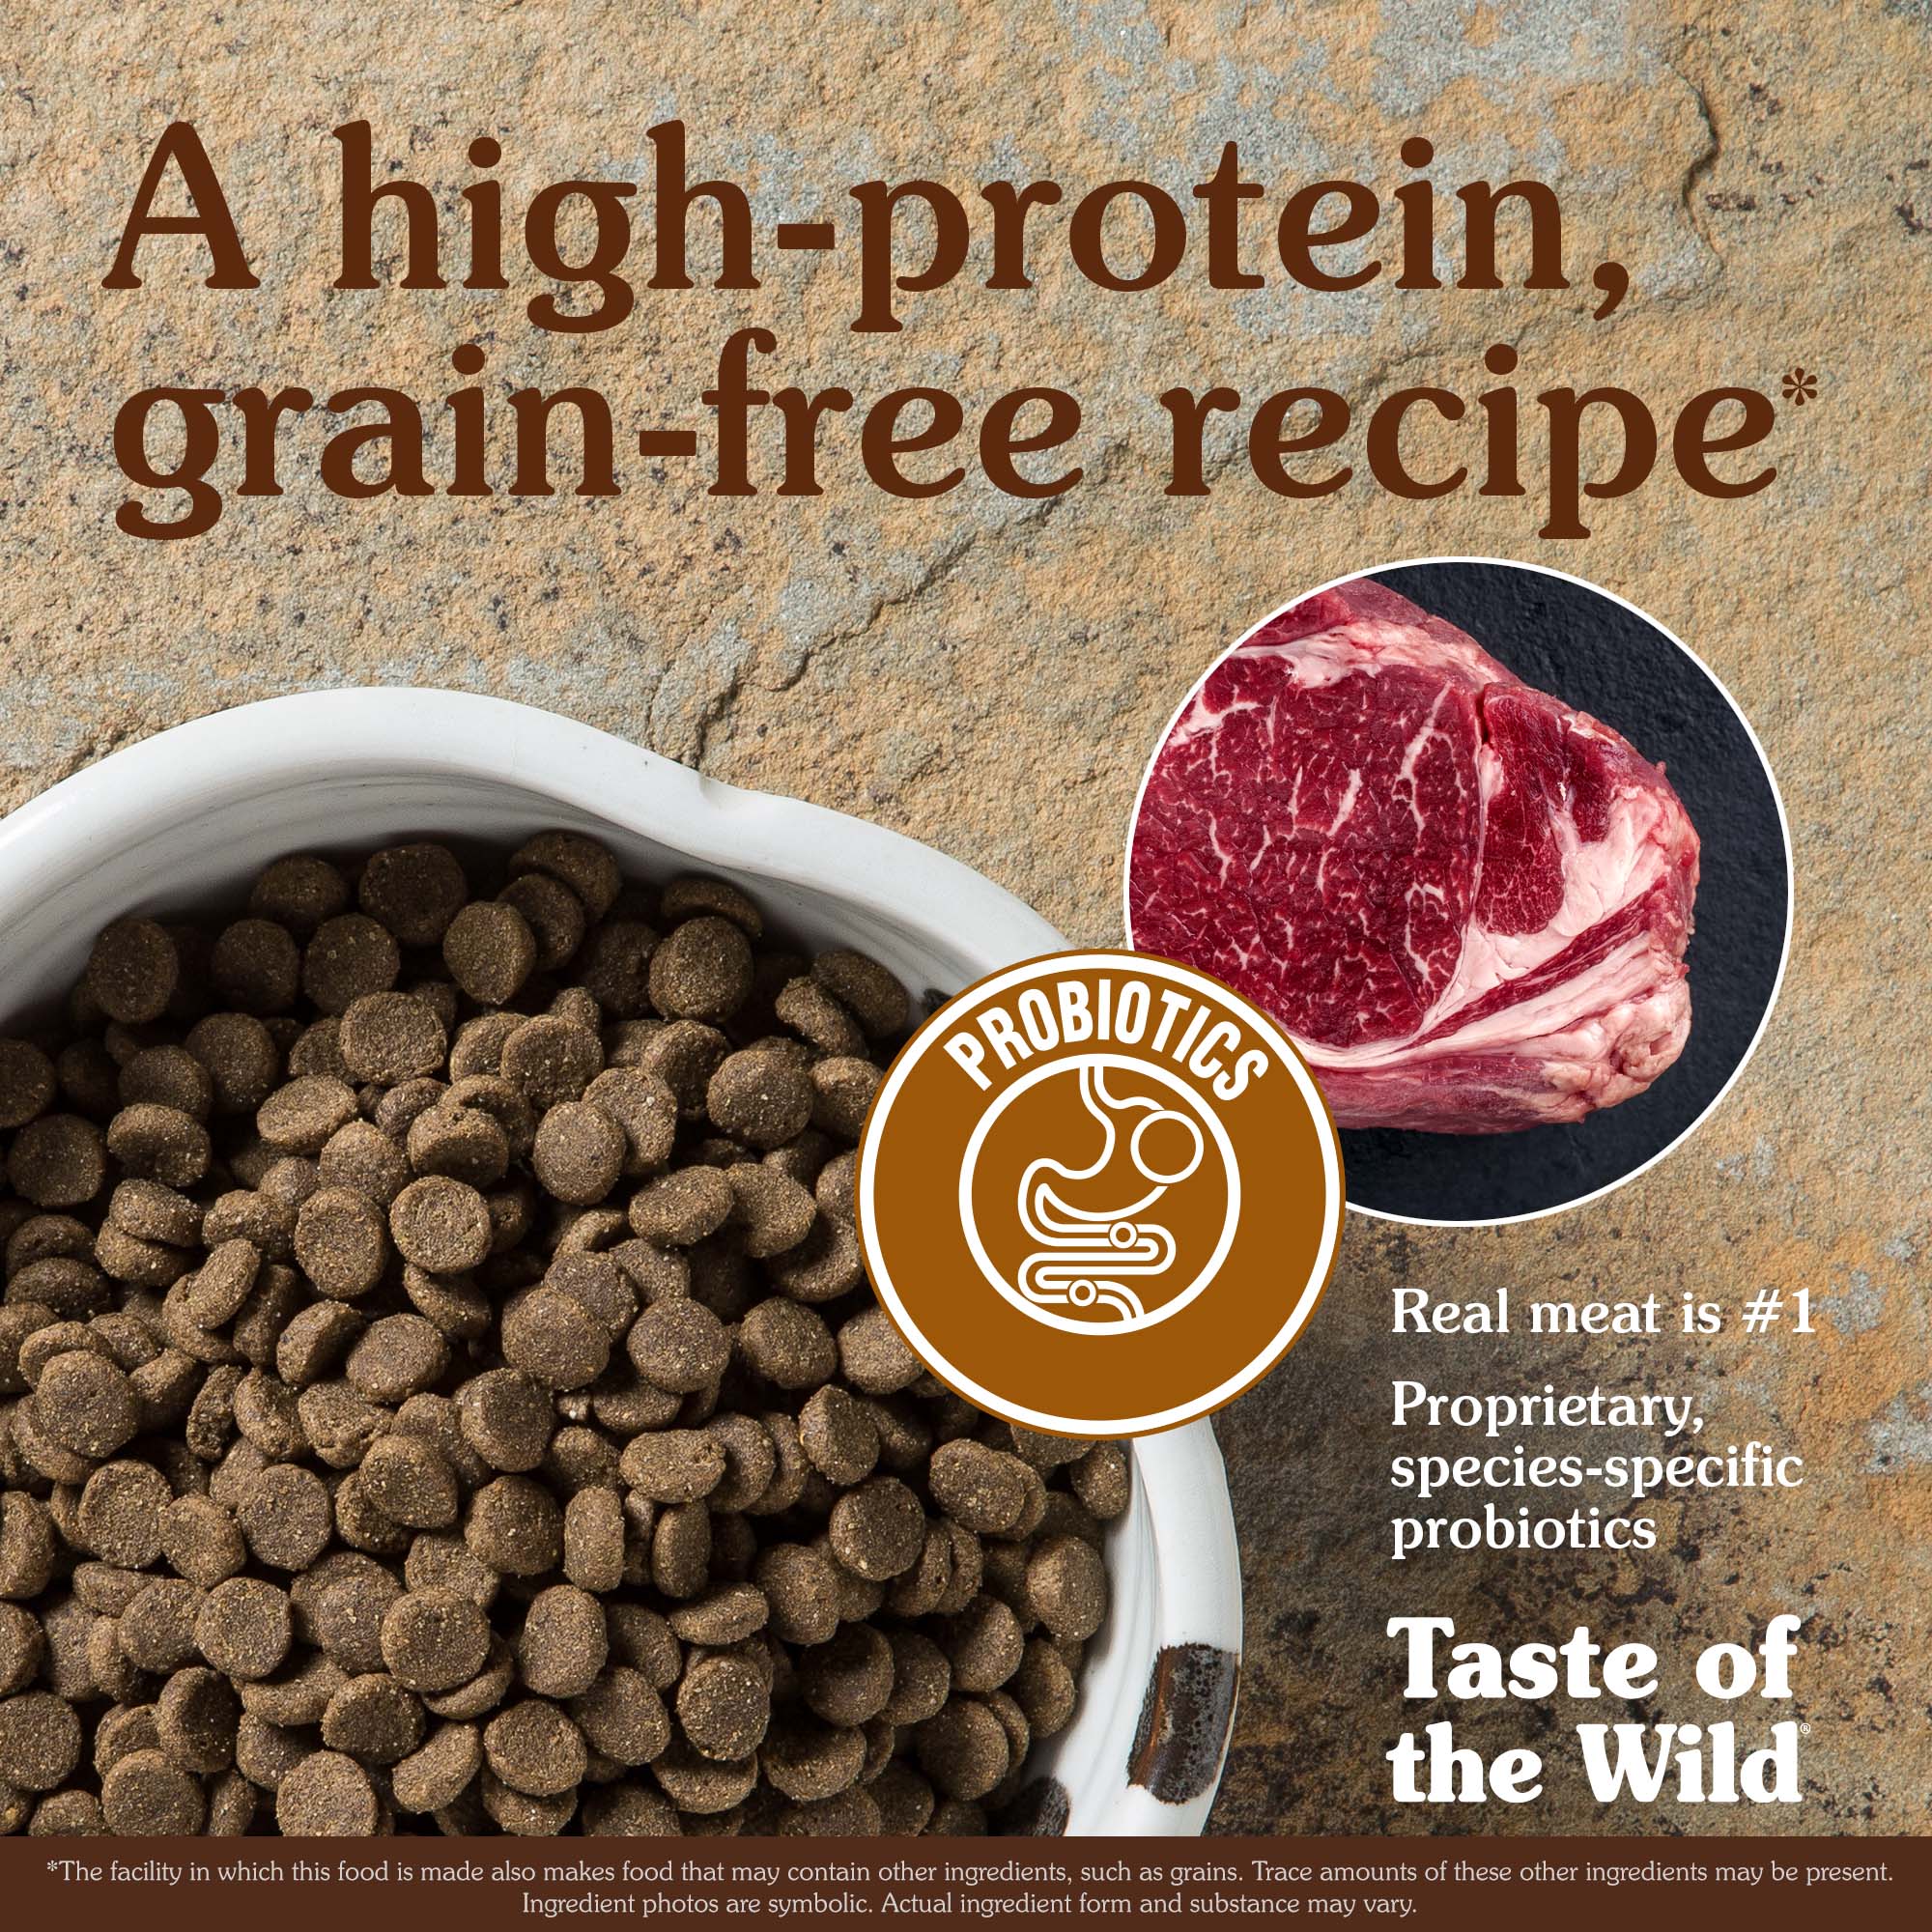 High Prairie Canine Recipe with Roasted Bison & Roasted Venison Kibble in a White Bowl | Taste of the Wild